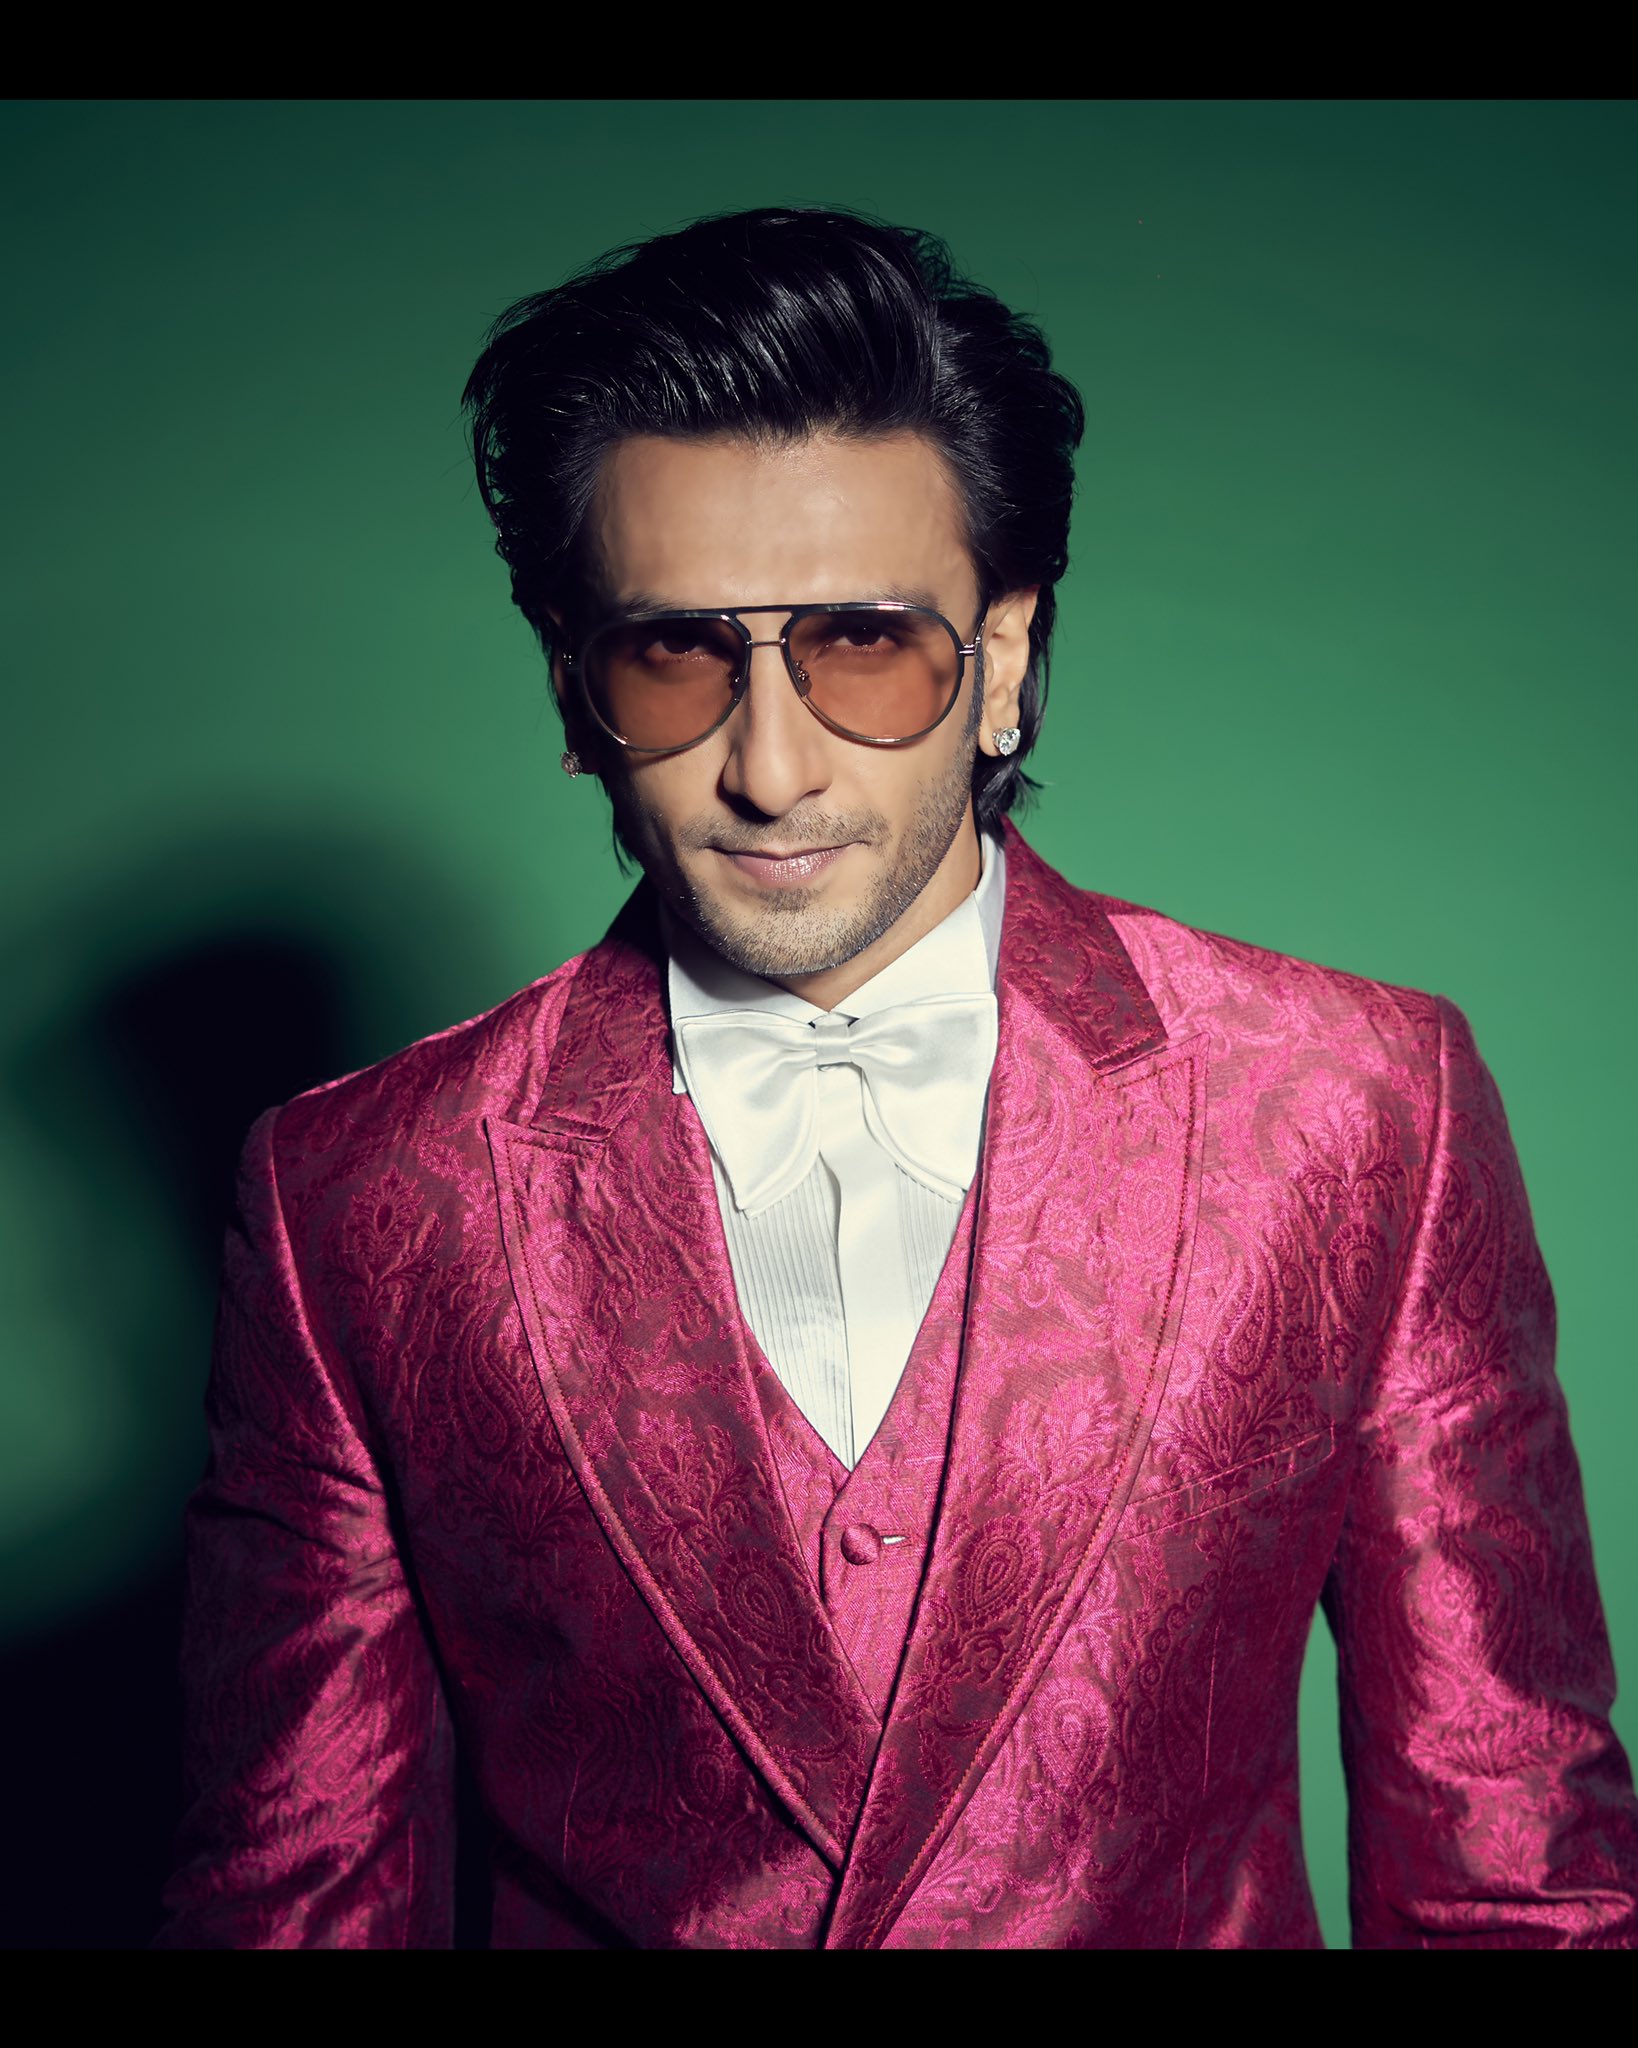 Filmfare Middle East - We are totally in love with @RanveerSingh's